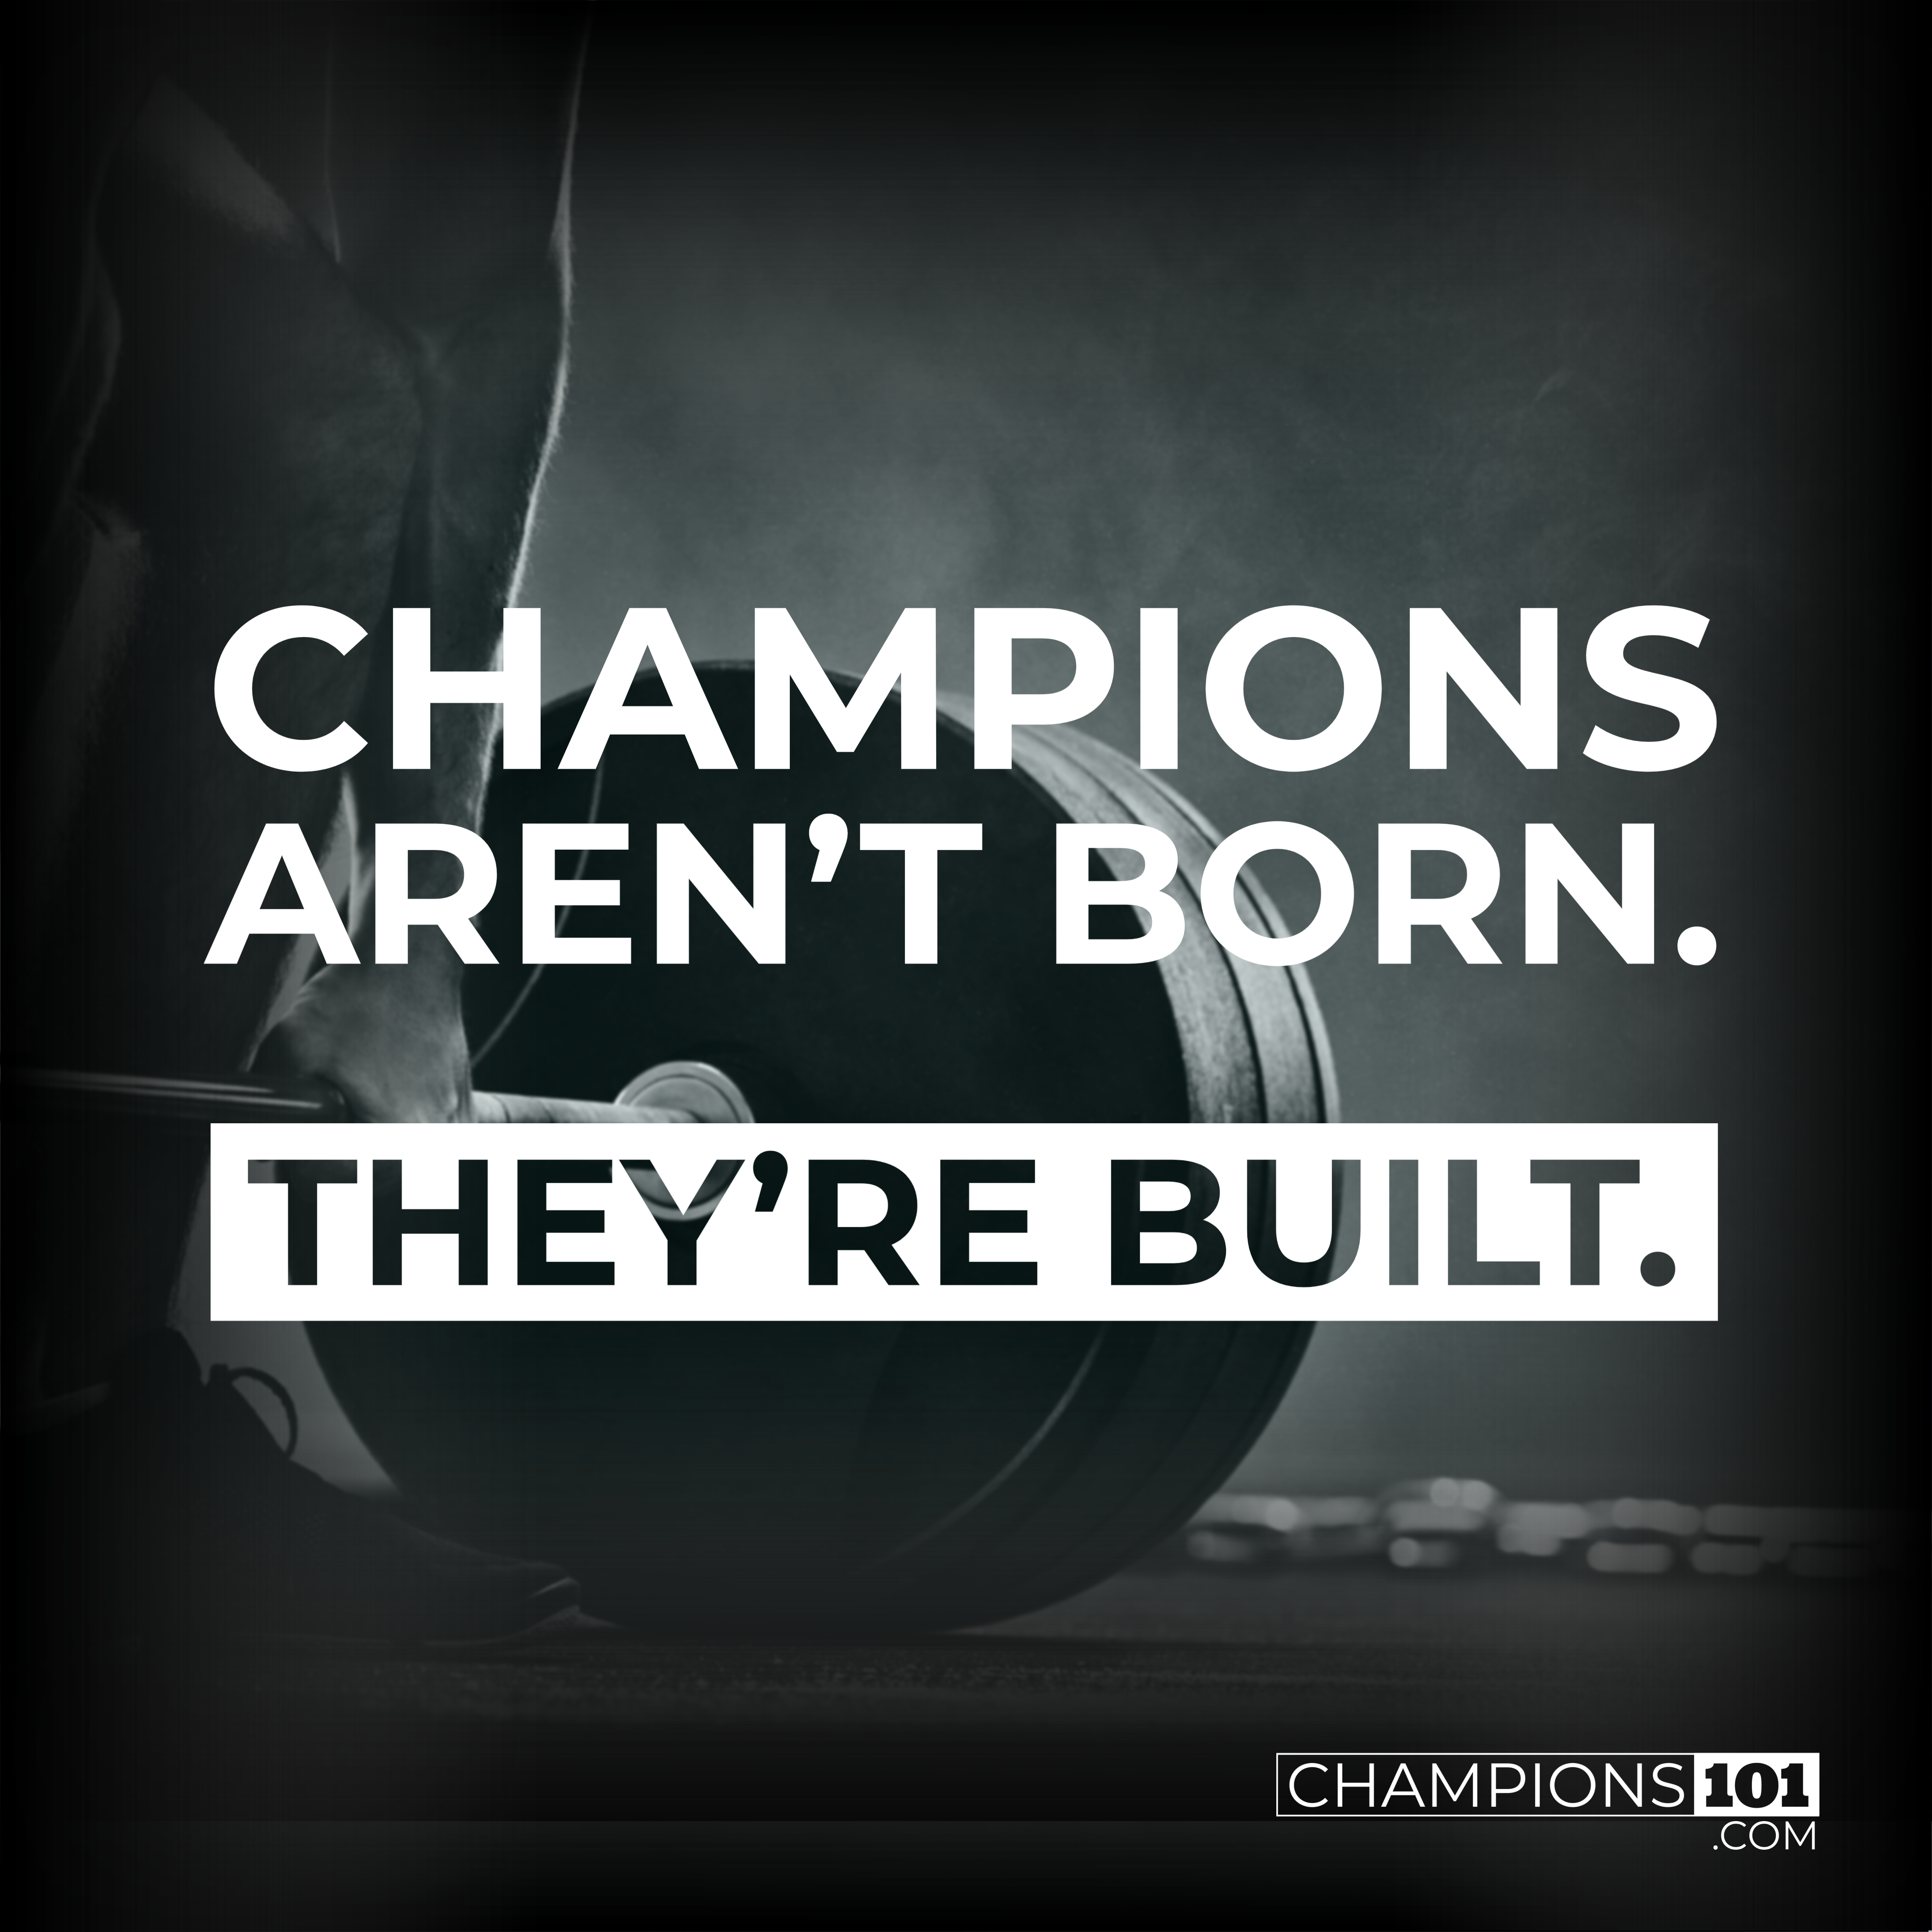 Champions aren't born, they're built.